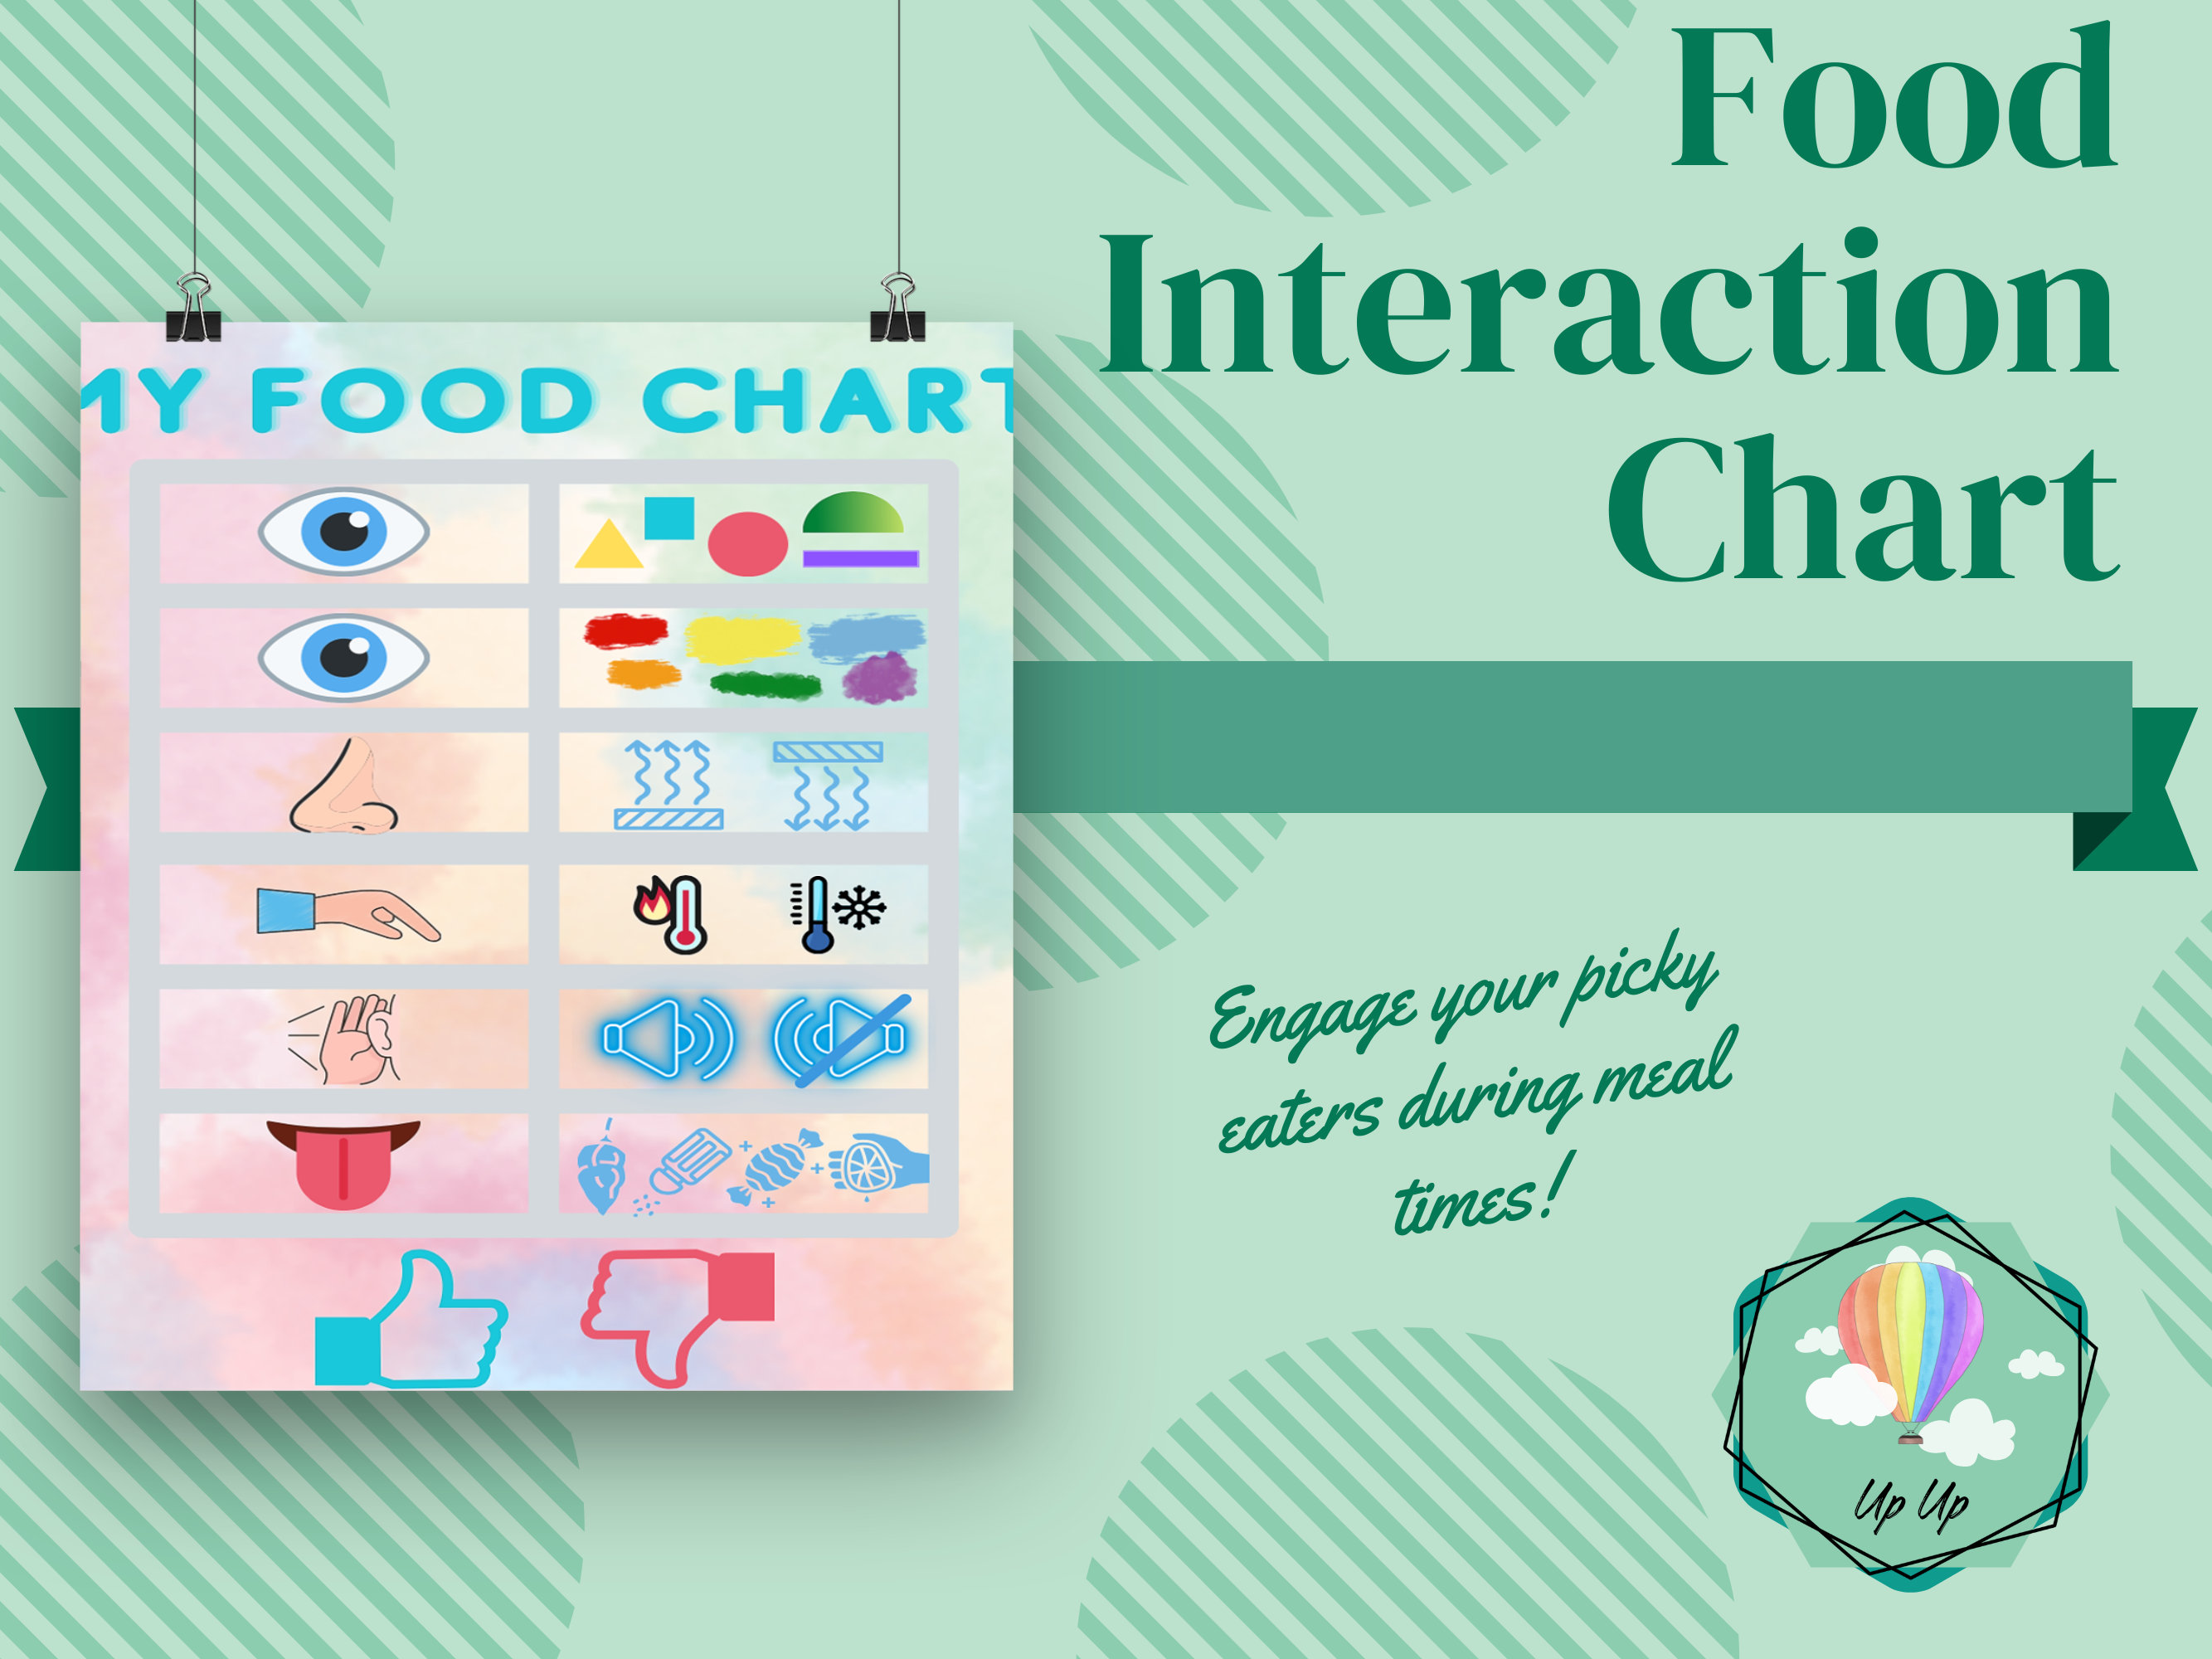 Foods, Free Full-Text